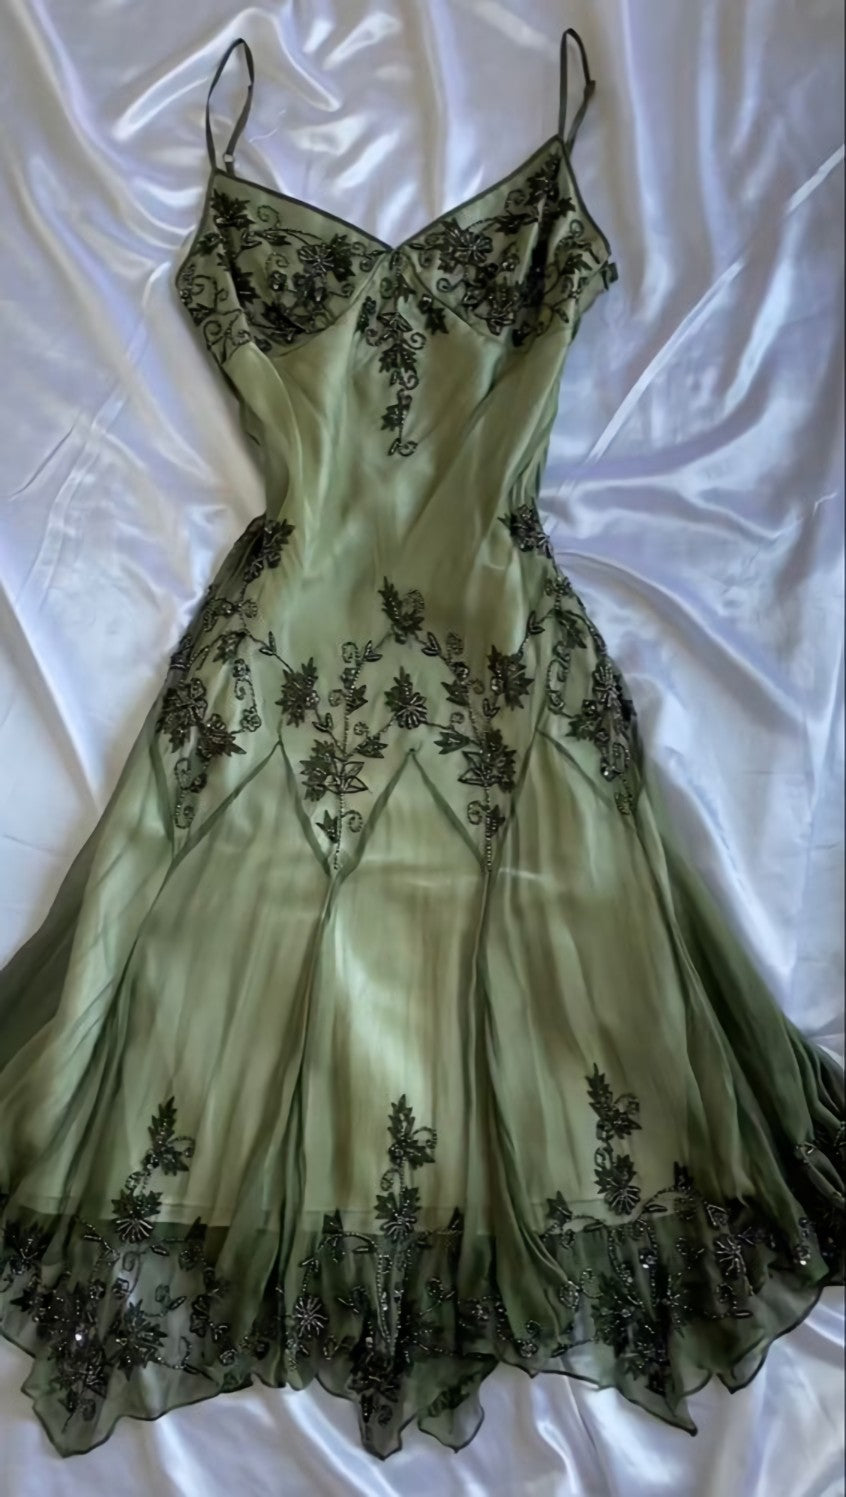 Pretty Prom Dress, vintage green emerald maxi dress embroidered crystals floral Prom Dresses